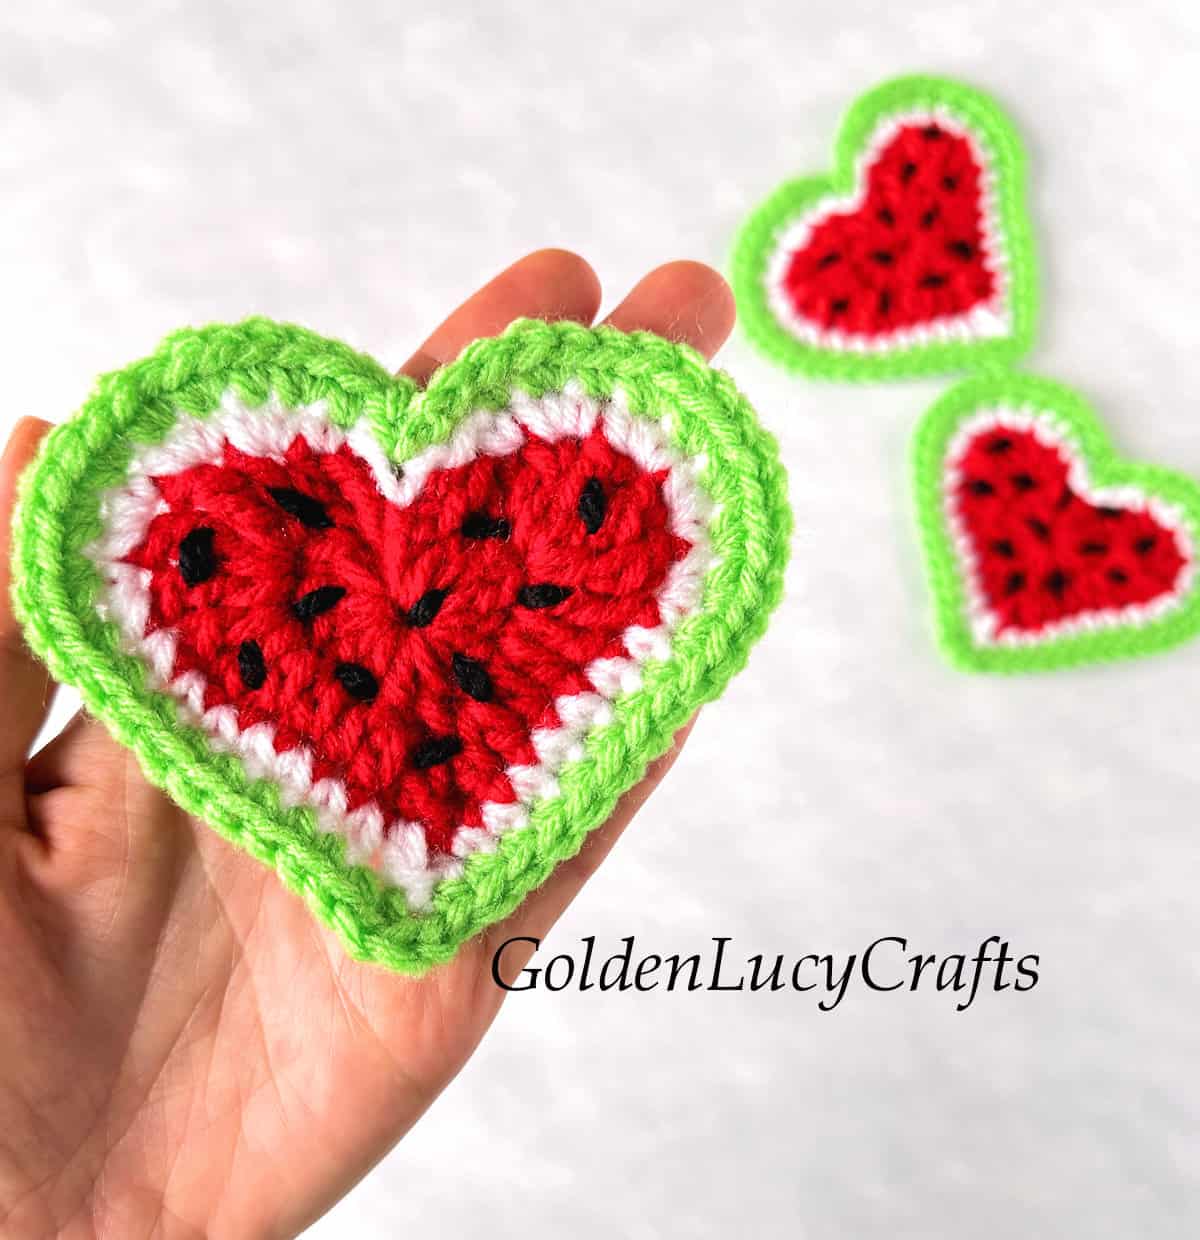 Crochet watermelon heart in the palm of a hand.